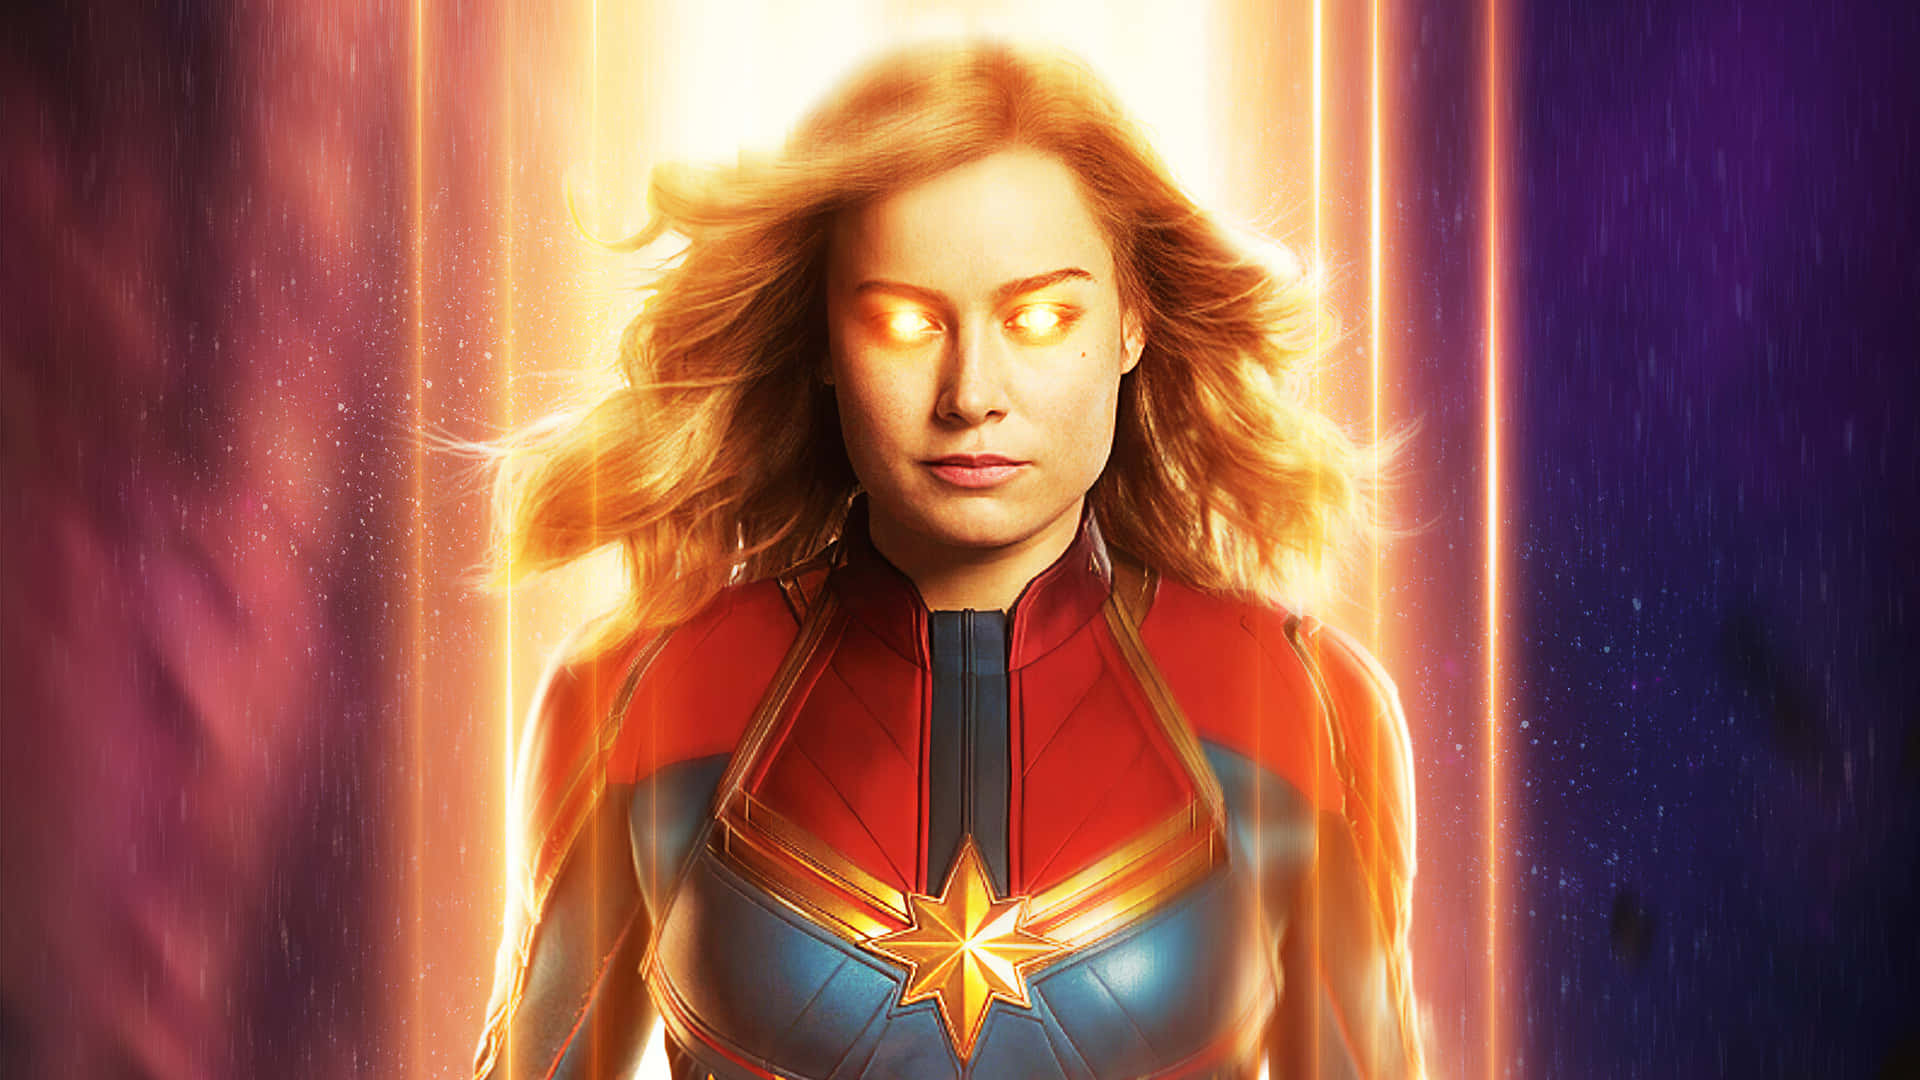 “prepare To Take Flight - The All-powerful Captain Marvel Comes To Life!” Background